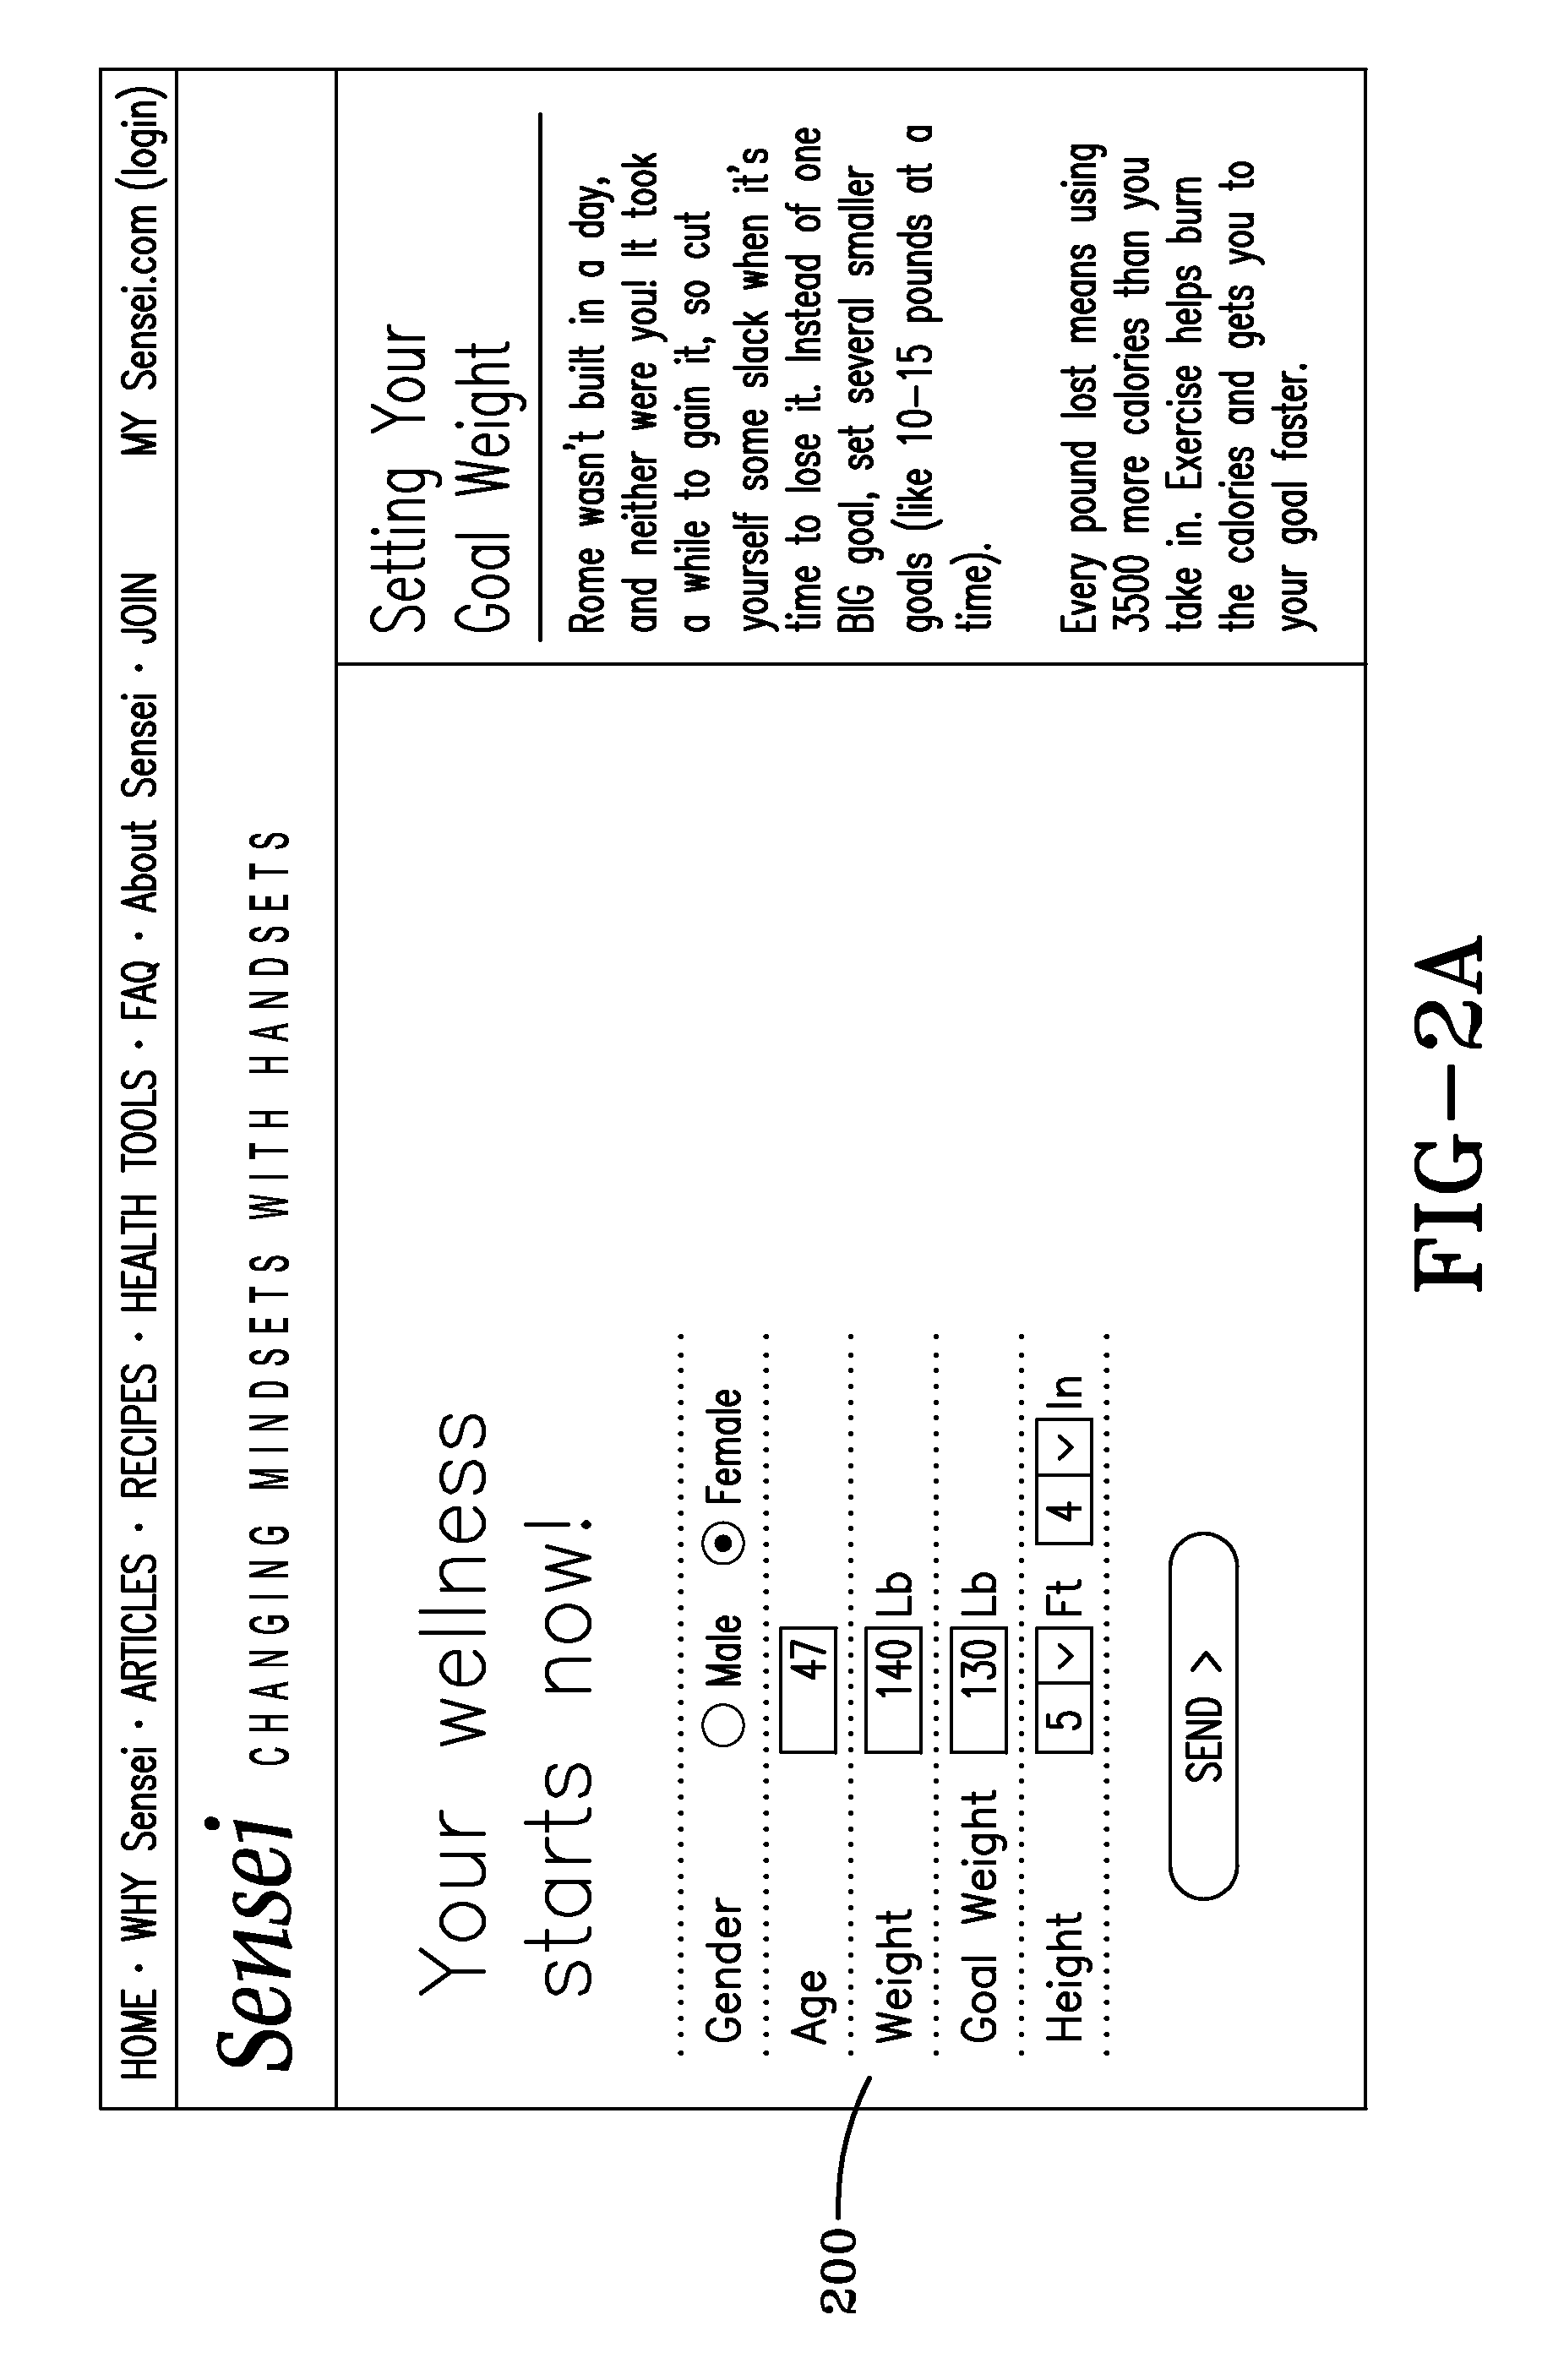 Method and system for suggesting meals based on tastes and preferences of individual users